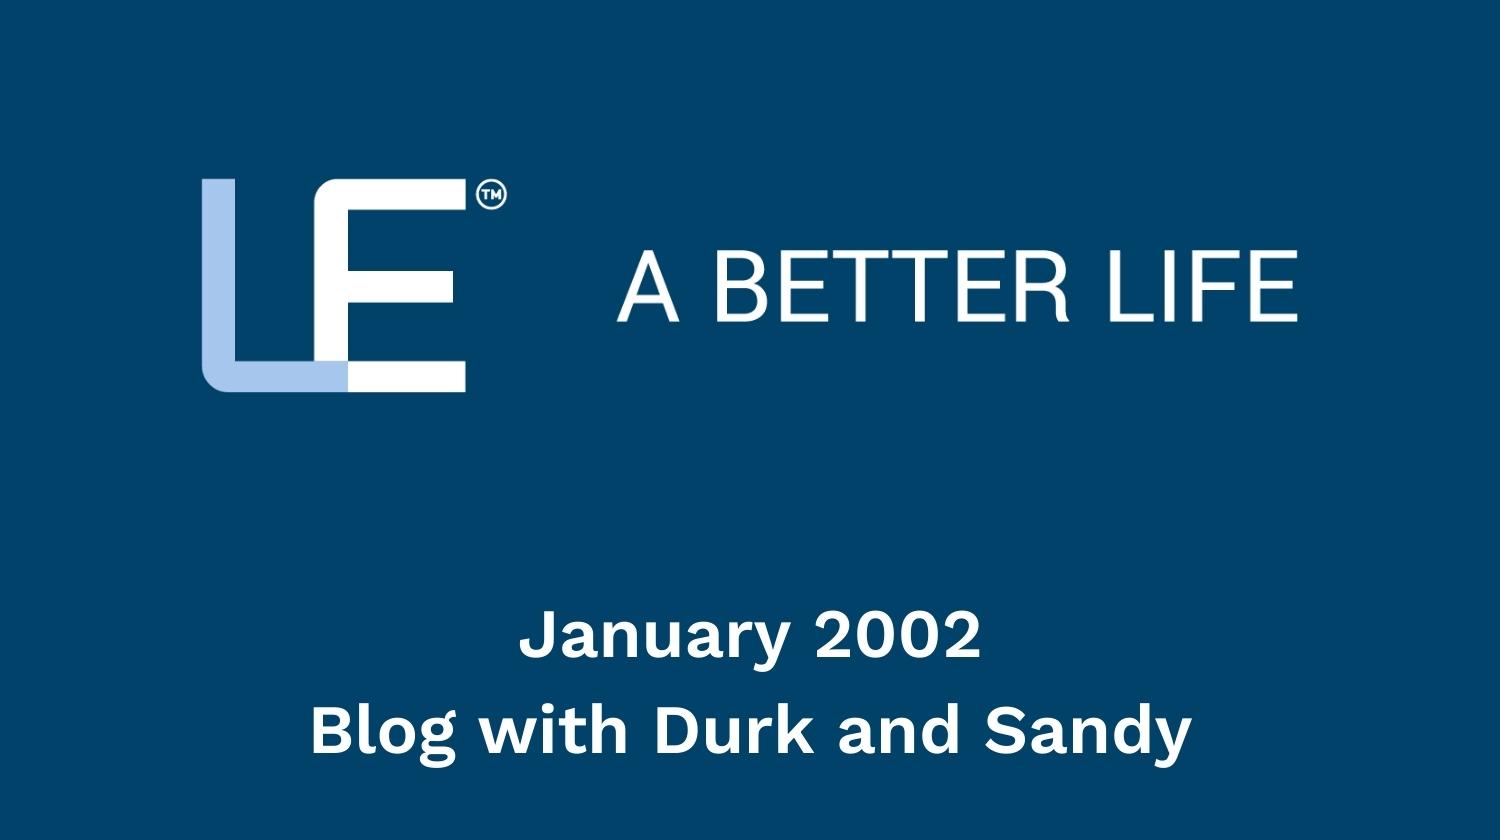 January 2002 Blog with Durk and Sandy